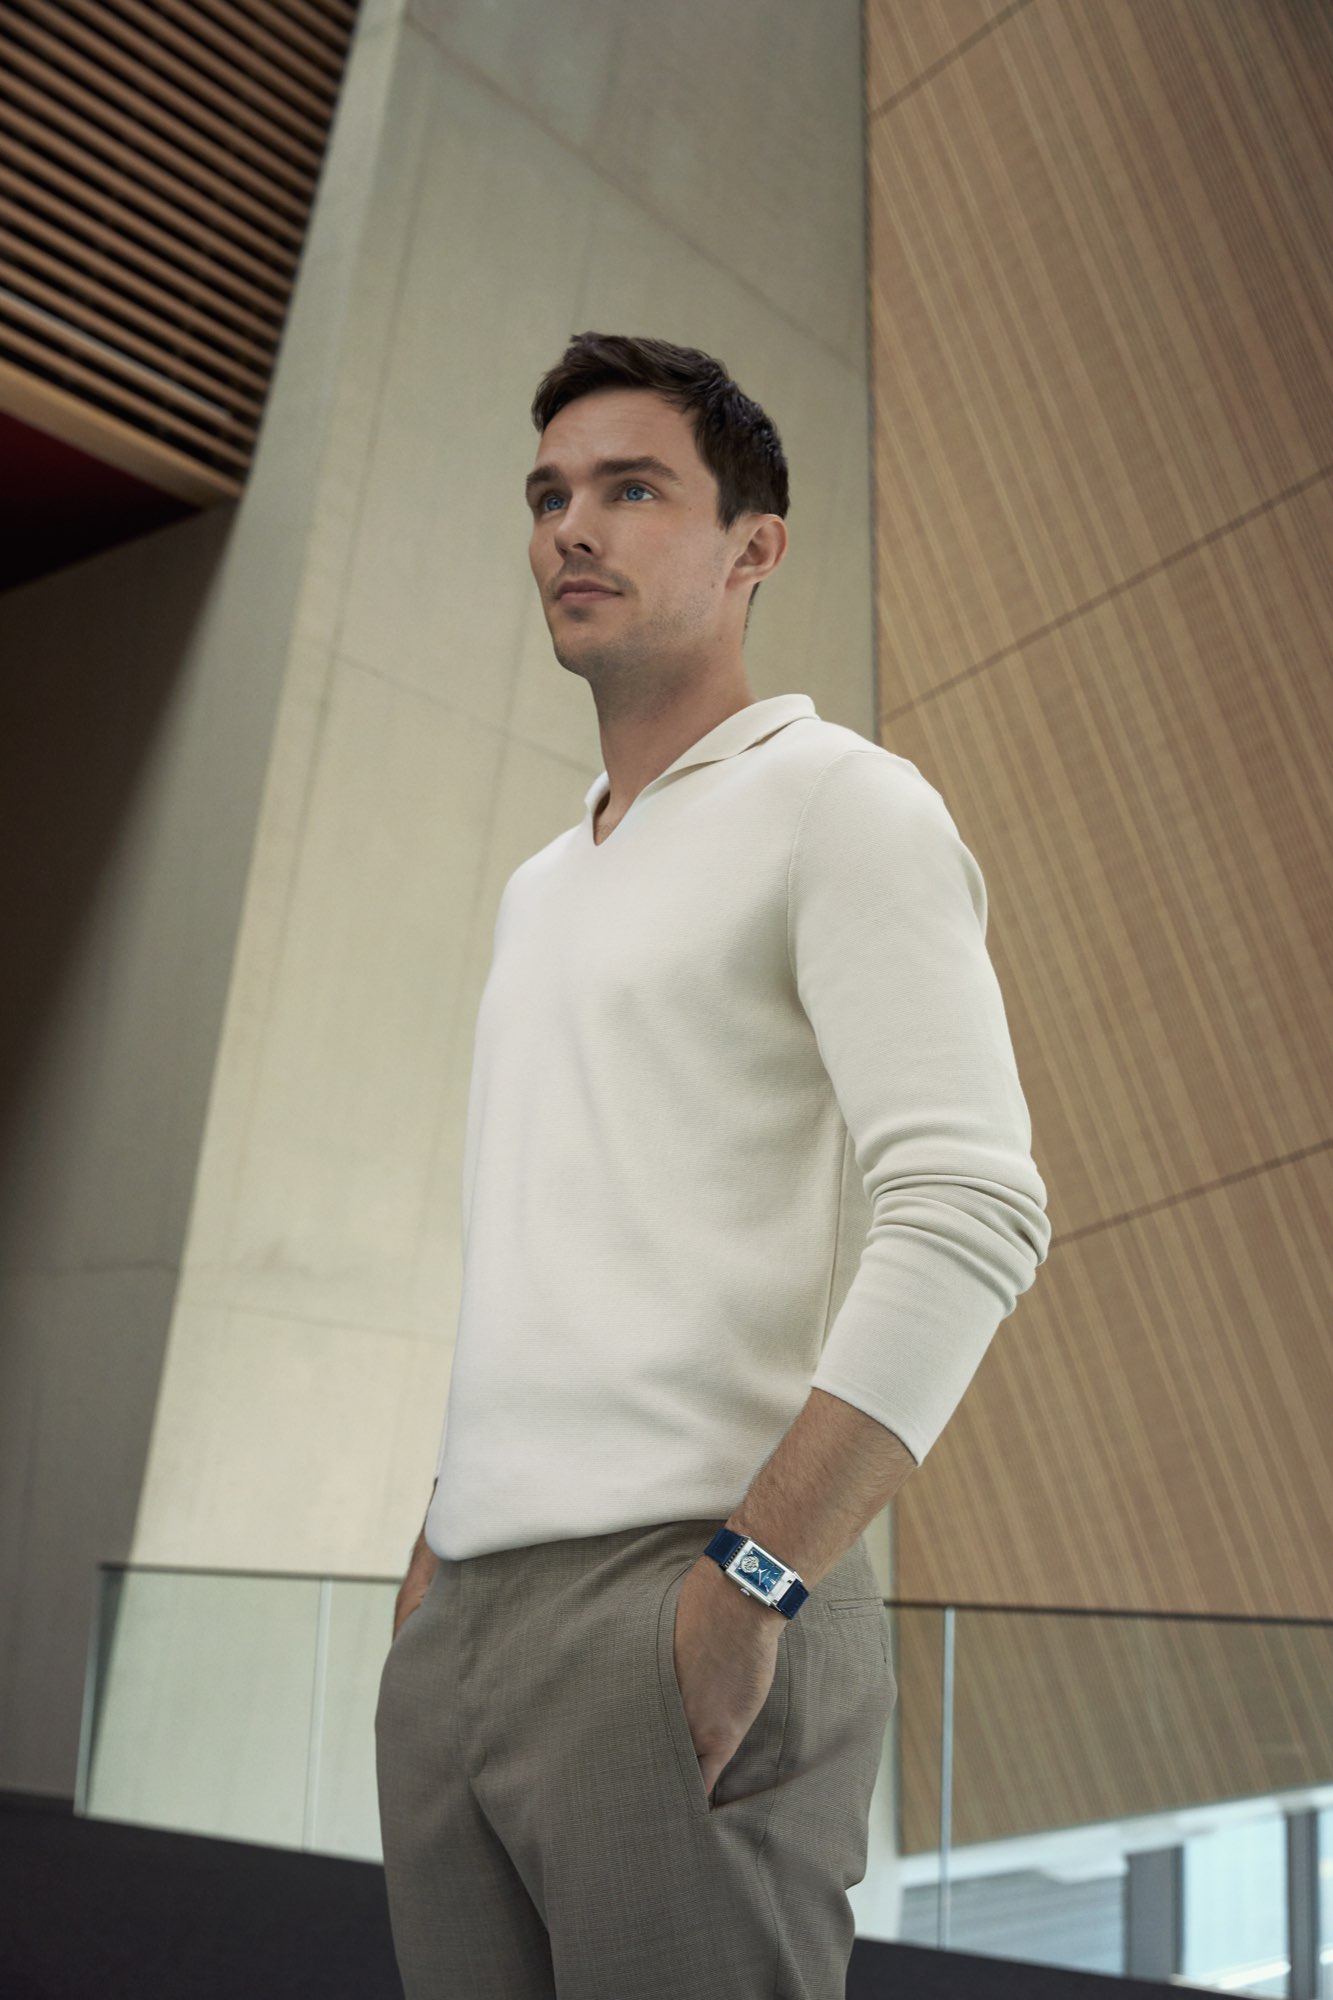 New work of Fabienne for Jaeger LeCoultre with Nicholas Hoult - neue-arbeit-von-fabienne-f--r-jaeger-lecoultre-mit-nicholas-hoult-ID14732-04.jpeg?v=1639040424